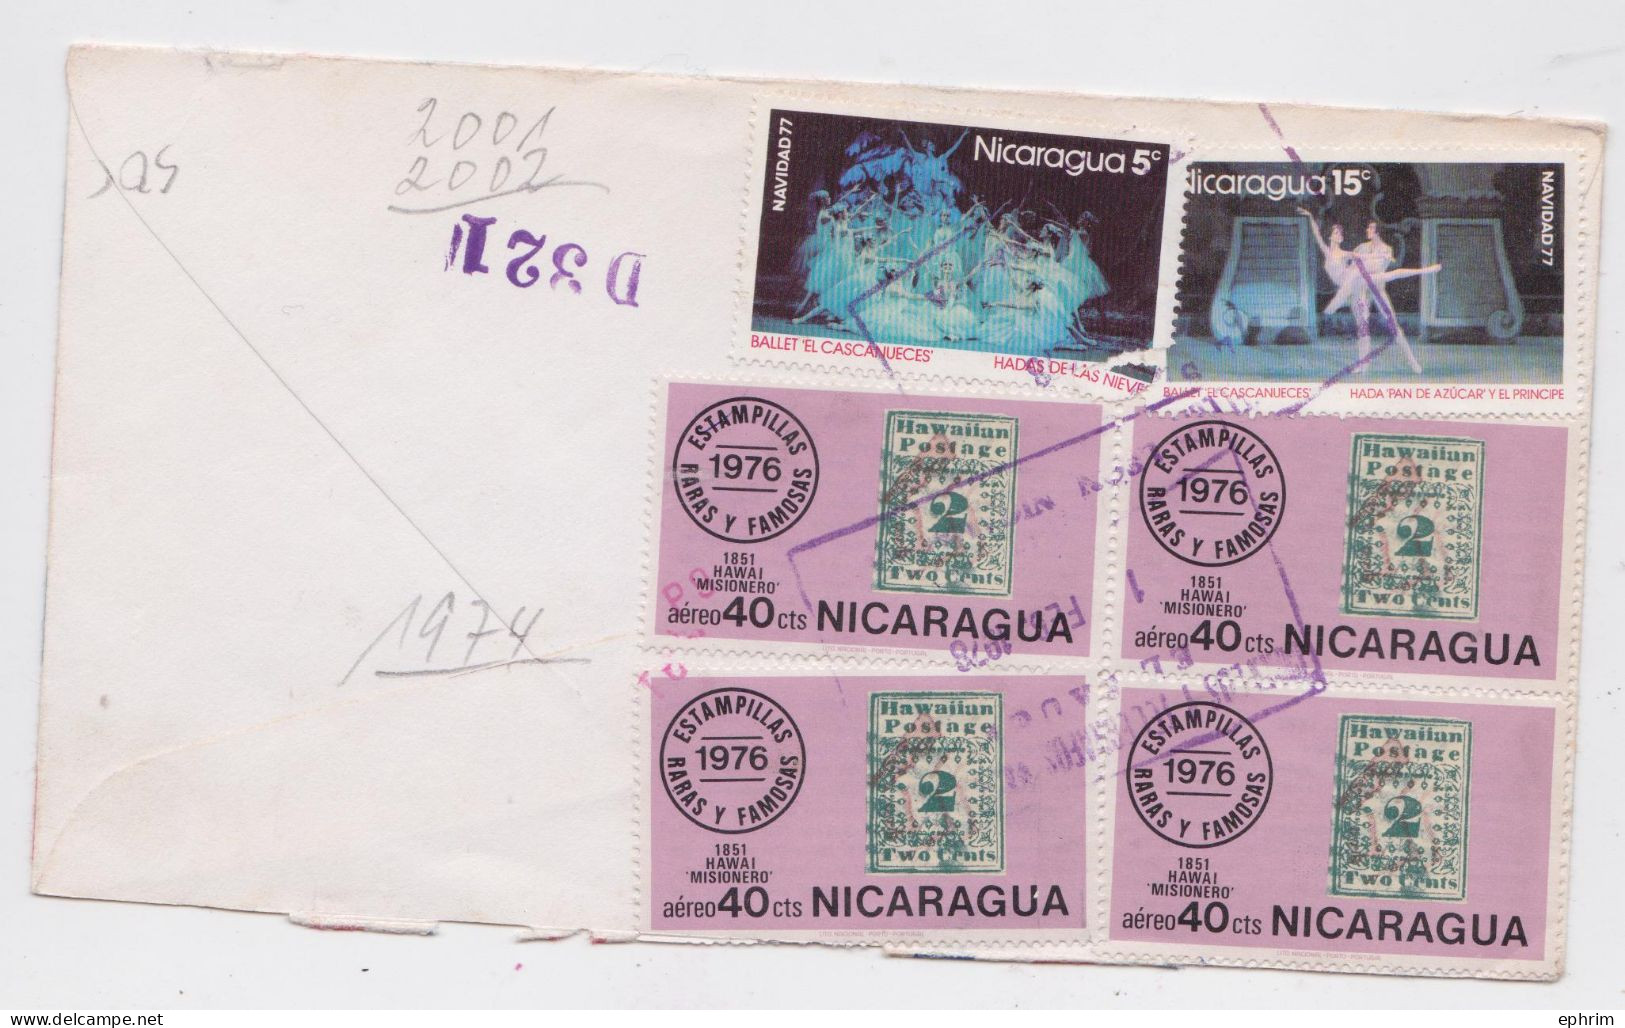 Nicaragua Lettre Timbre Danse Ballet Hawaiian Postage Stamp X6 Air Mail Cover Sello Correo Aereo To Los Angeles 1978 - Nicaragua